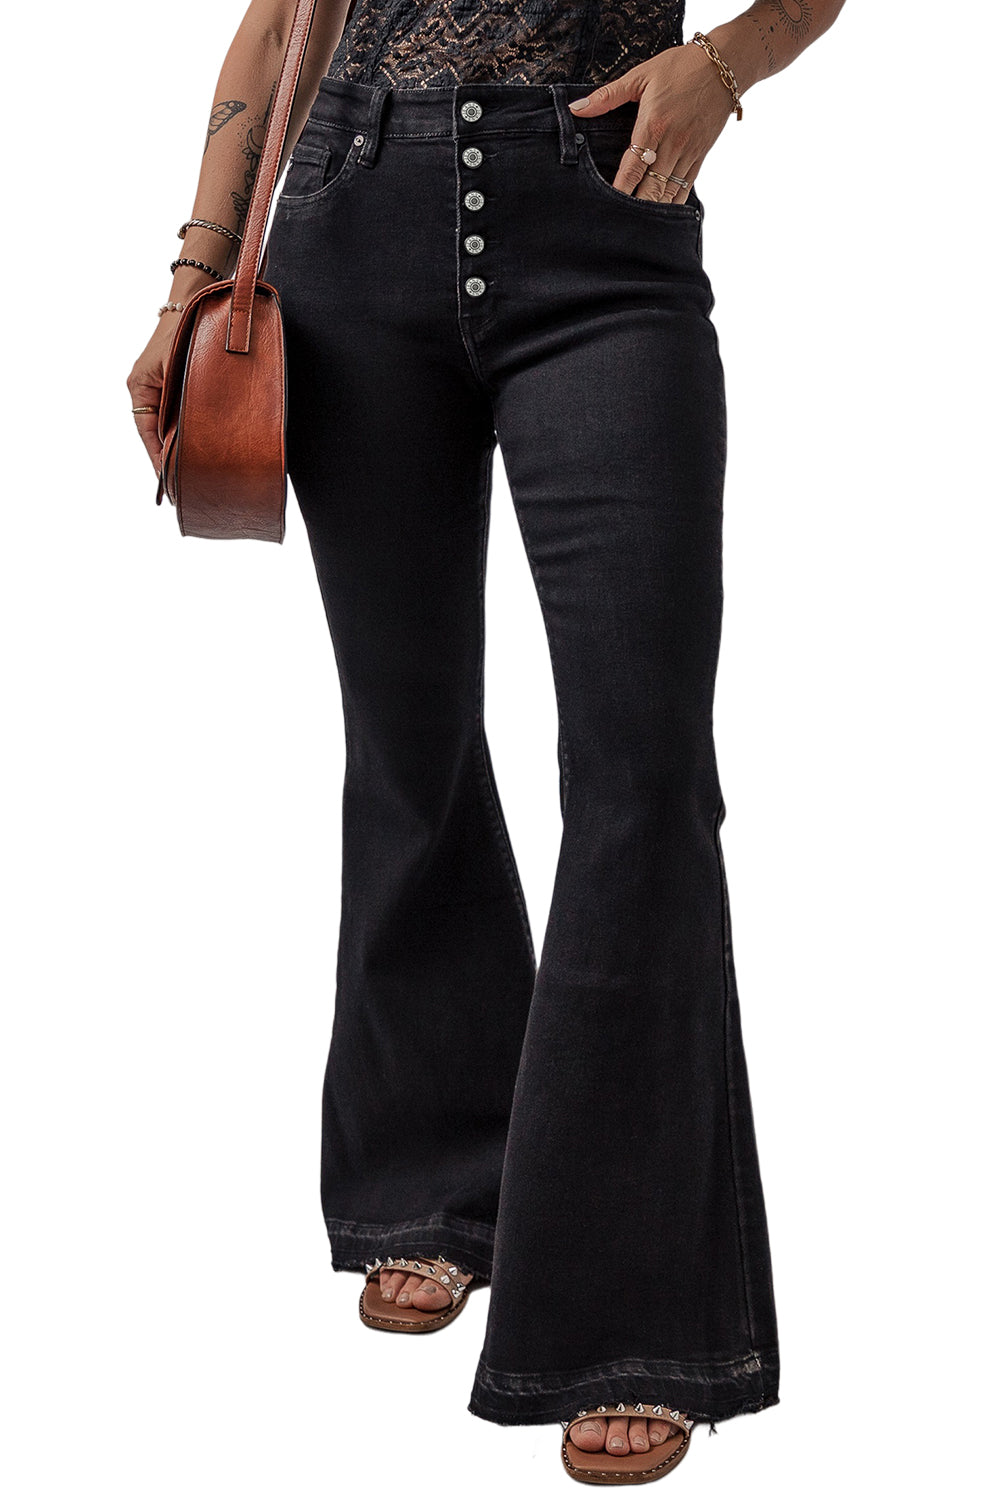 - Black High Waist Button Front Women's Flare Jeans - womens jeans at TFC&H Co.